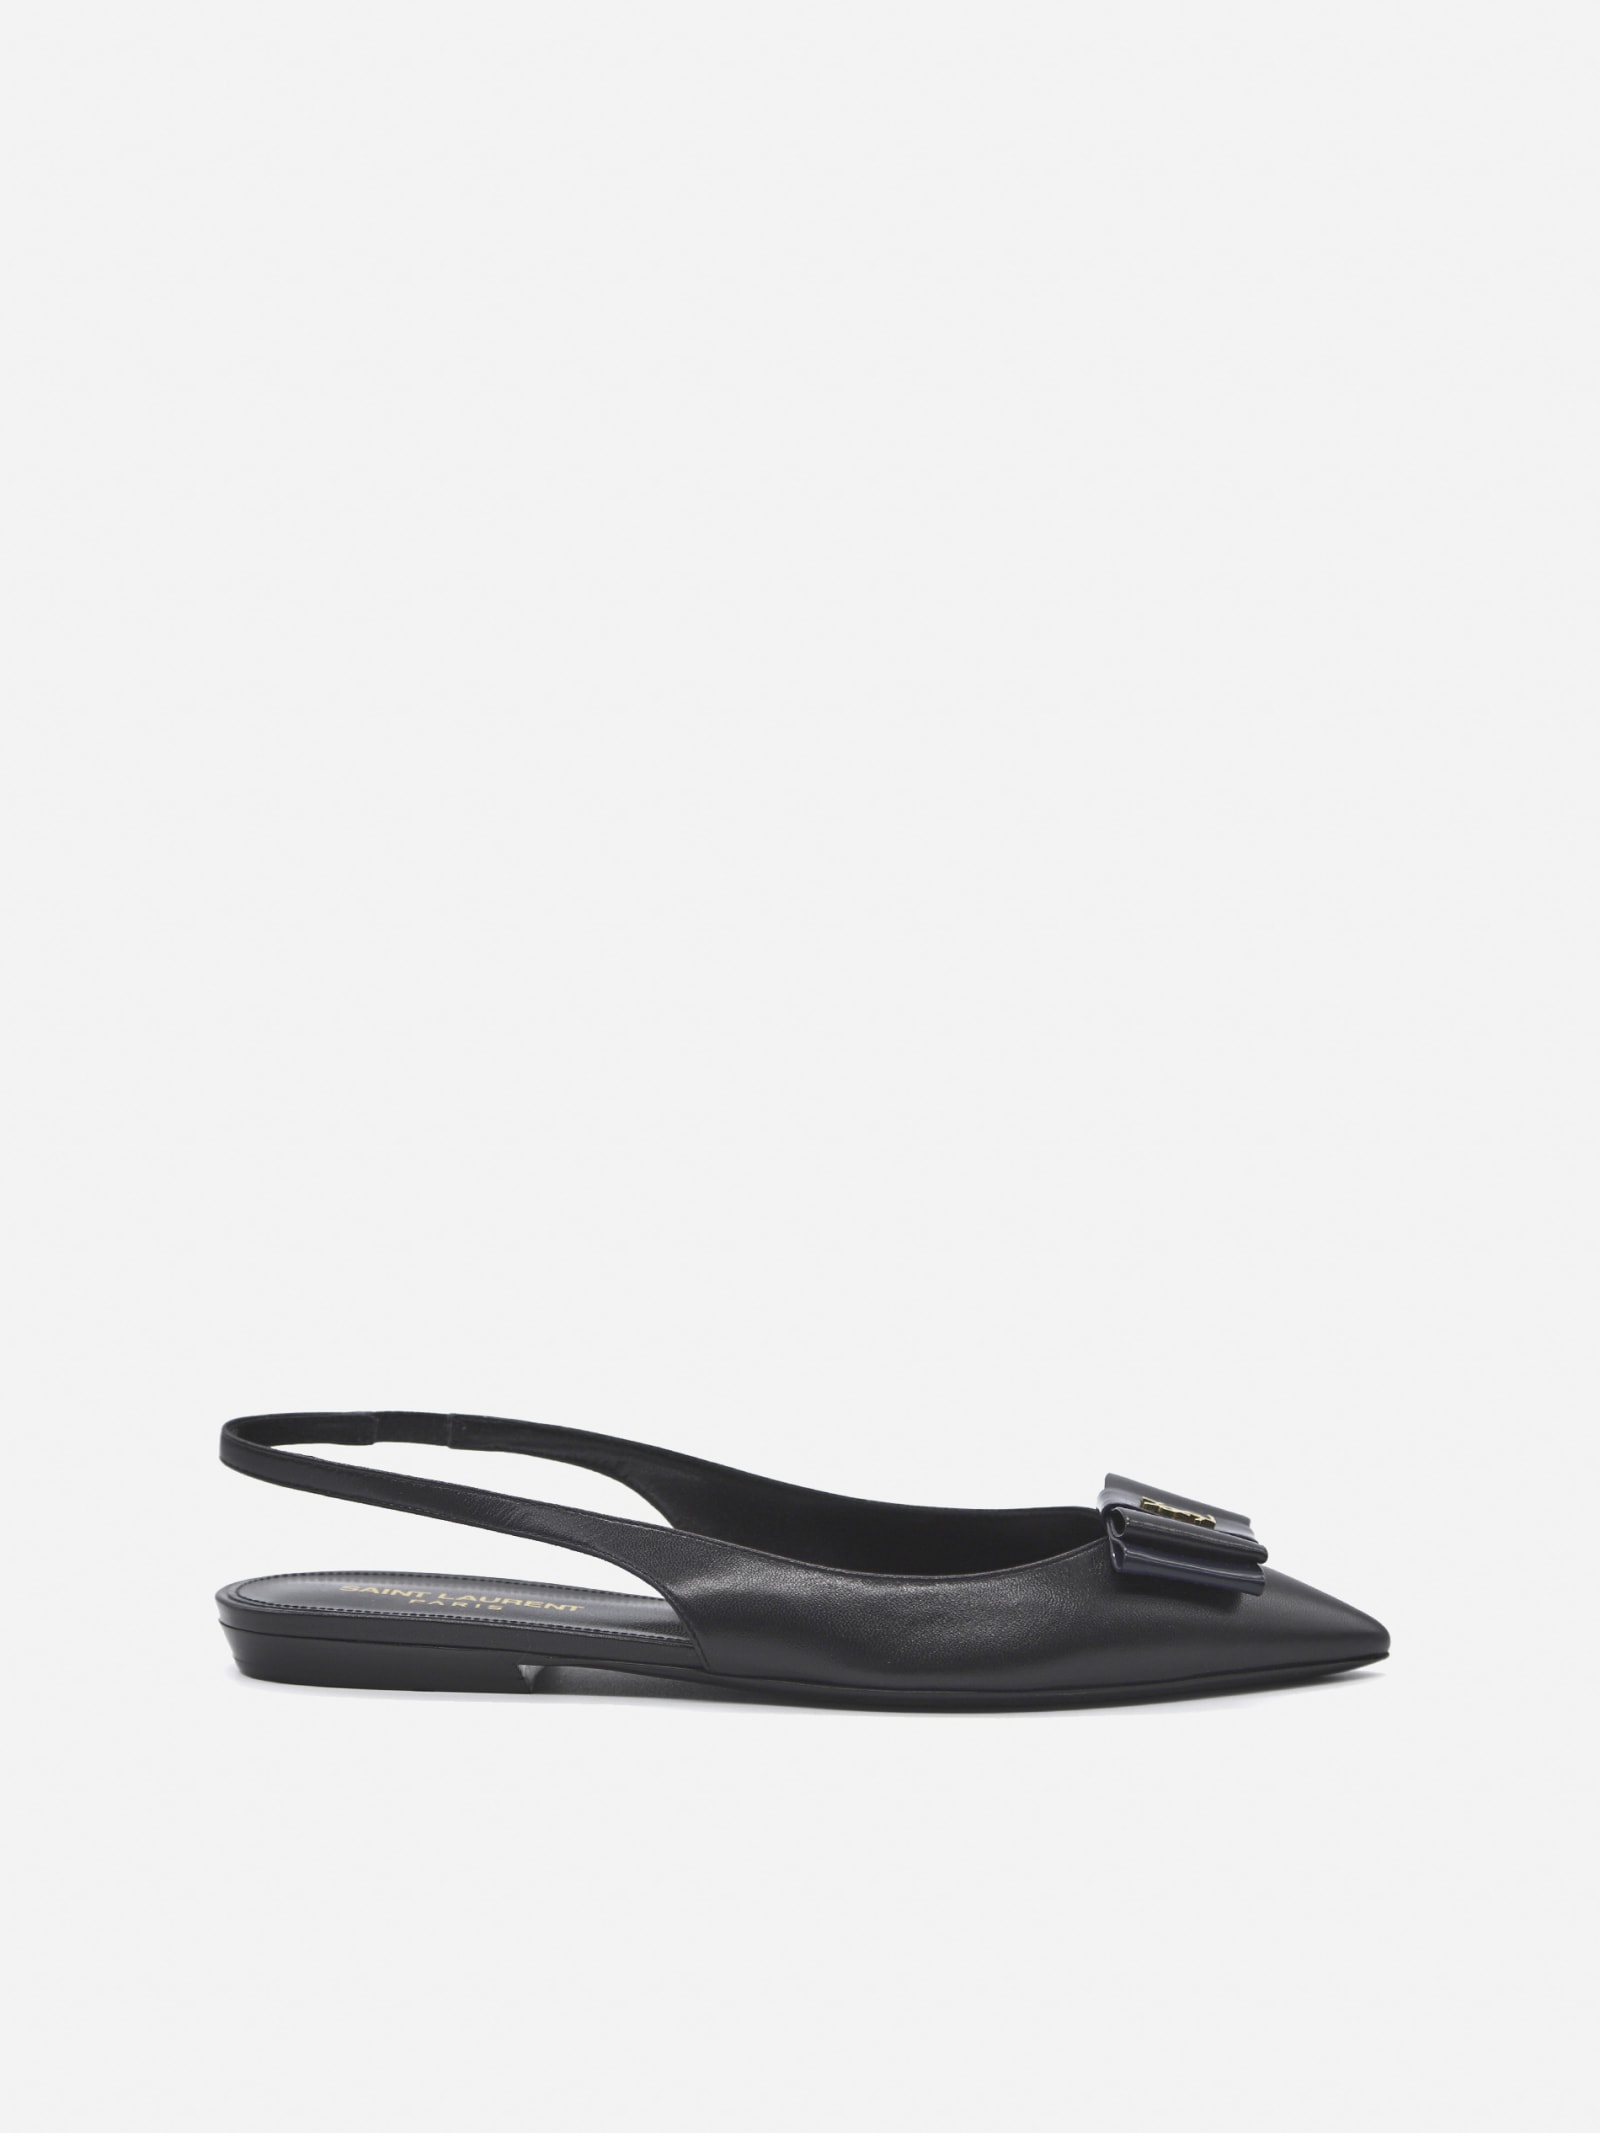 Buy Saint Laurent Ana? Flat D?ollet?In Leather With Monogram Detail online, shop Saint Laurent shoes with free shipping